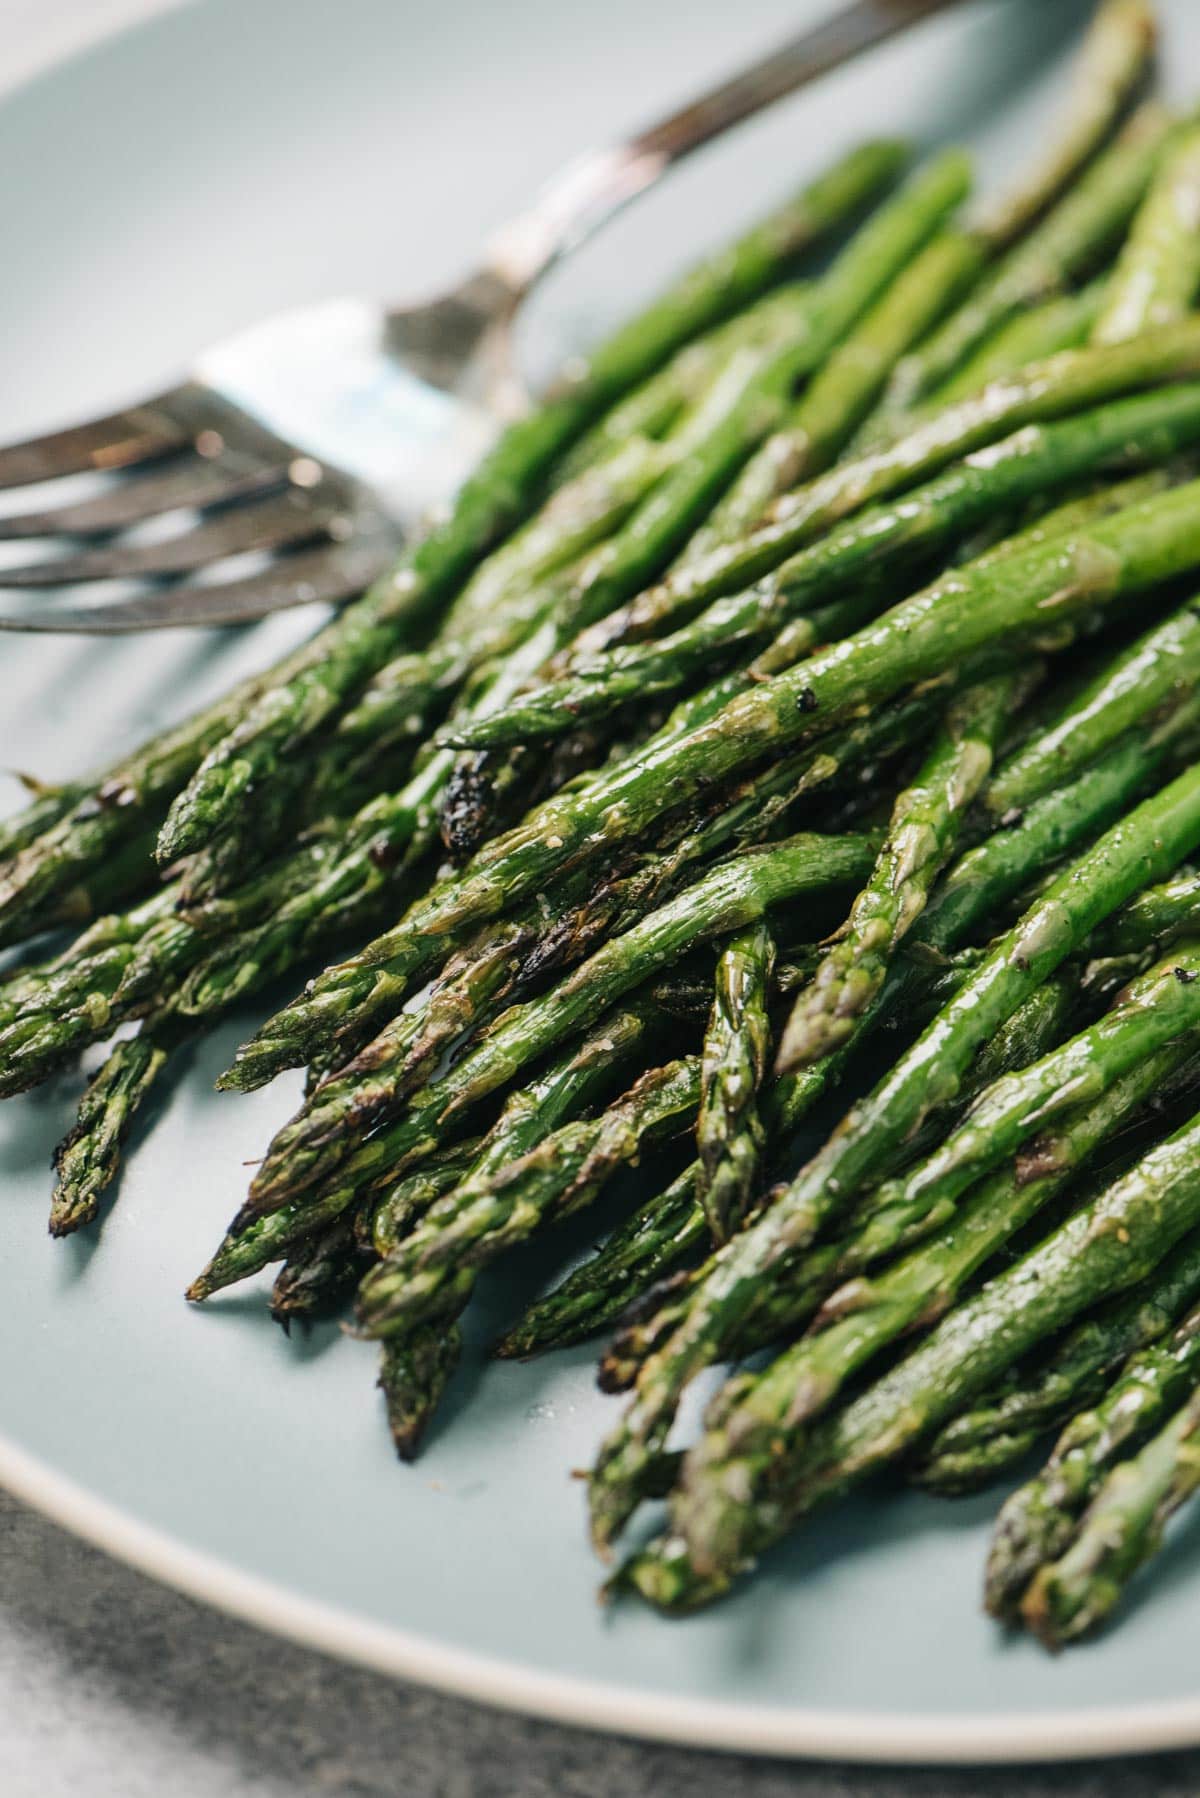 Side view, grilled asparagus on a blue plate with a silver serving fork.